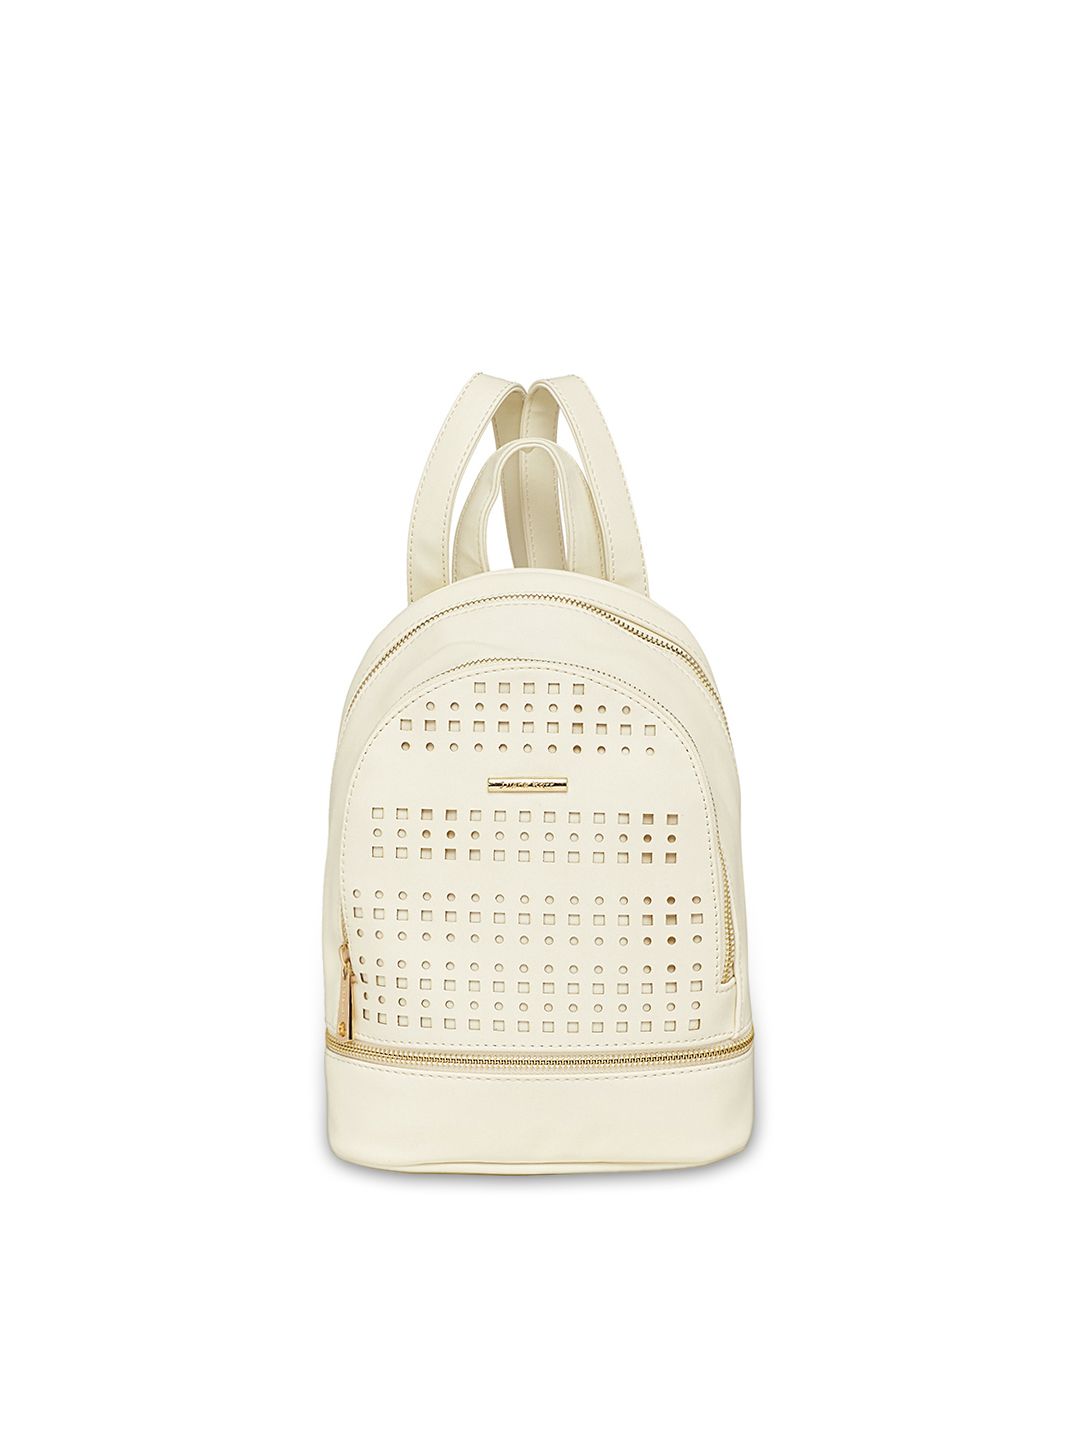 Diana Korr Women Off-White Solid Backpack Price in India